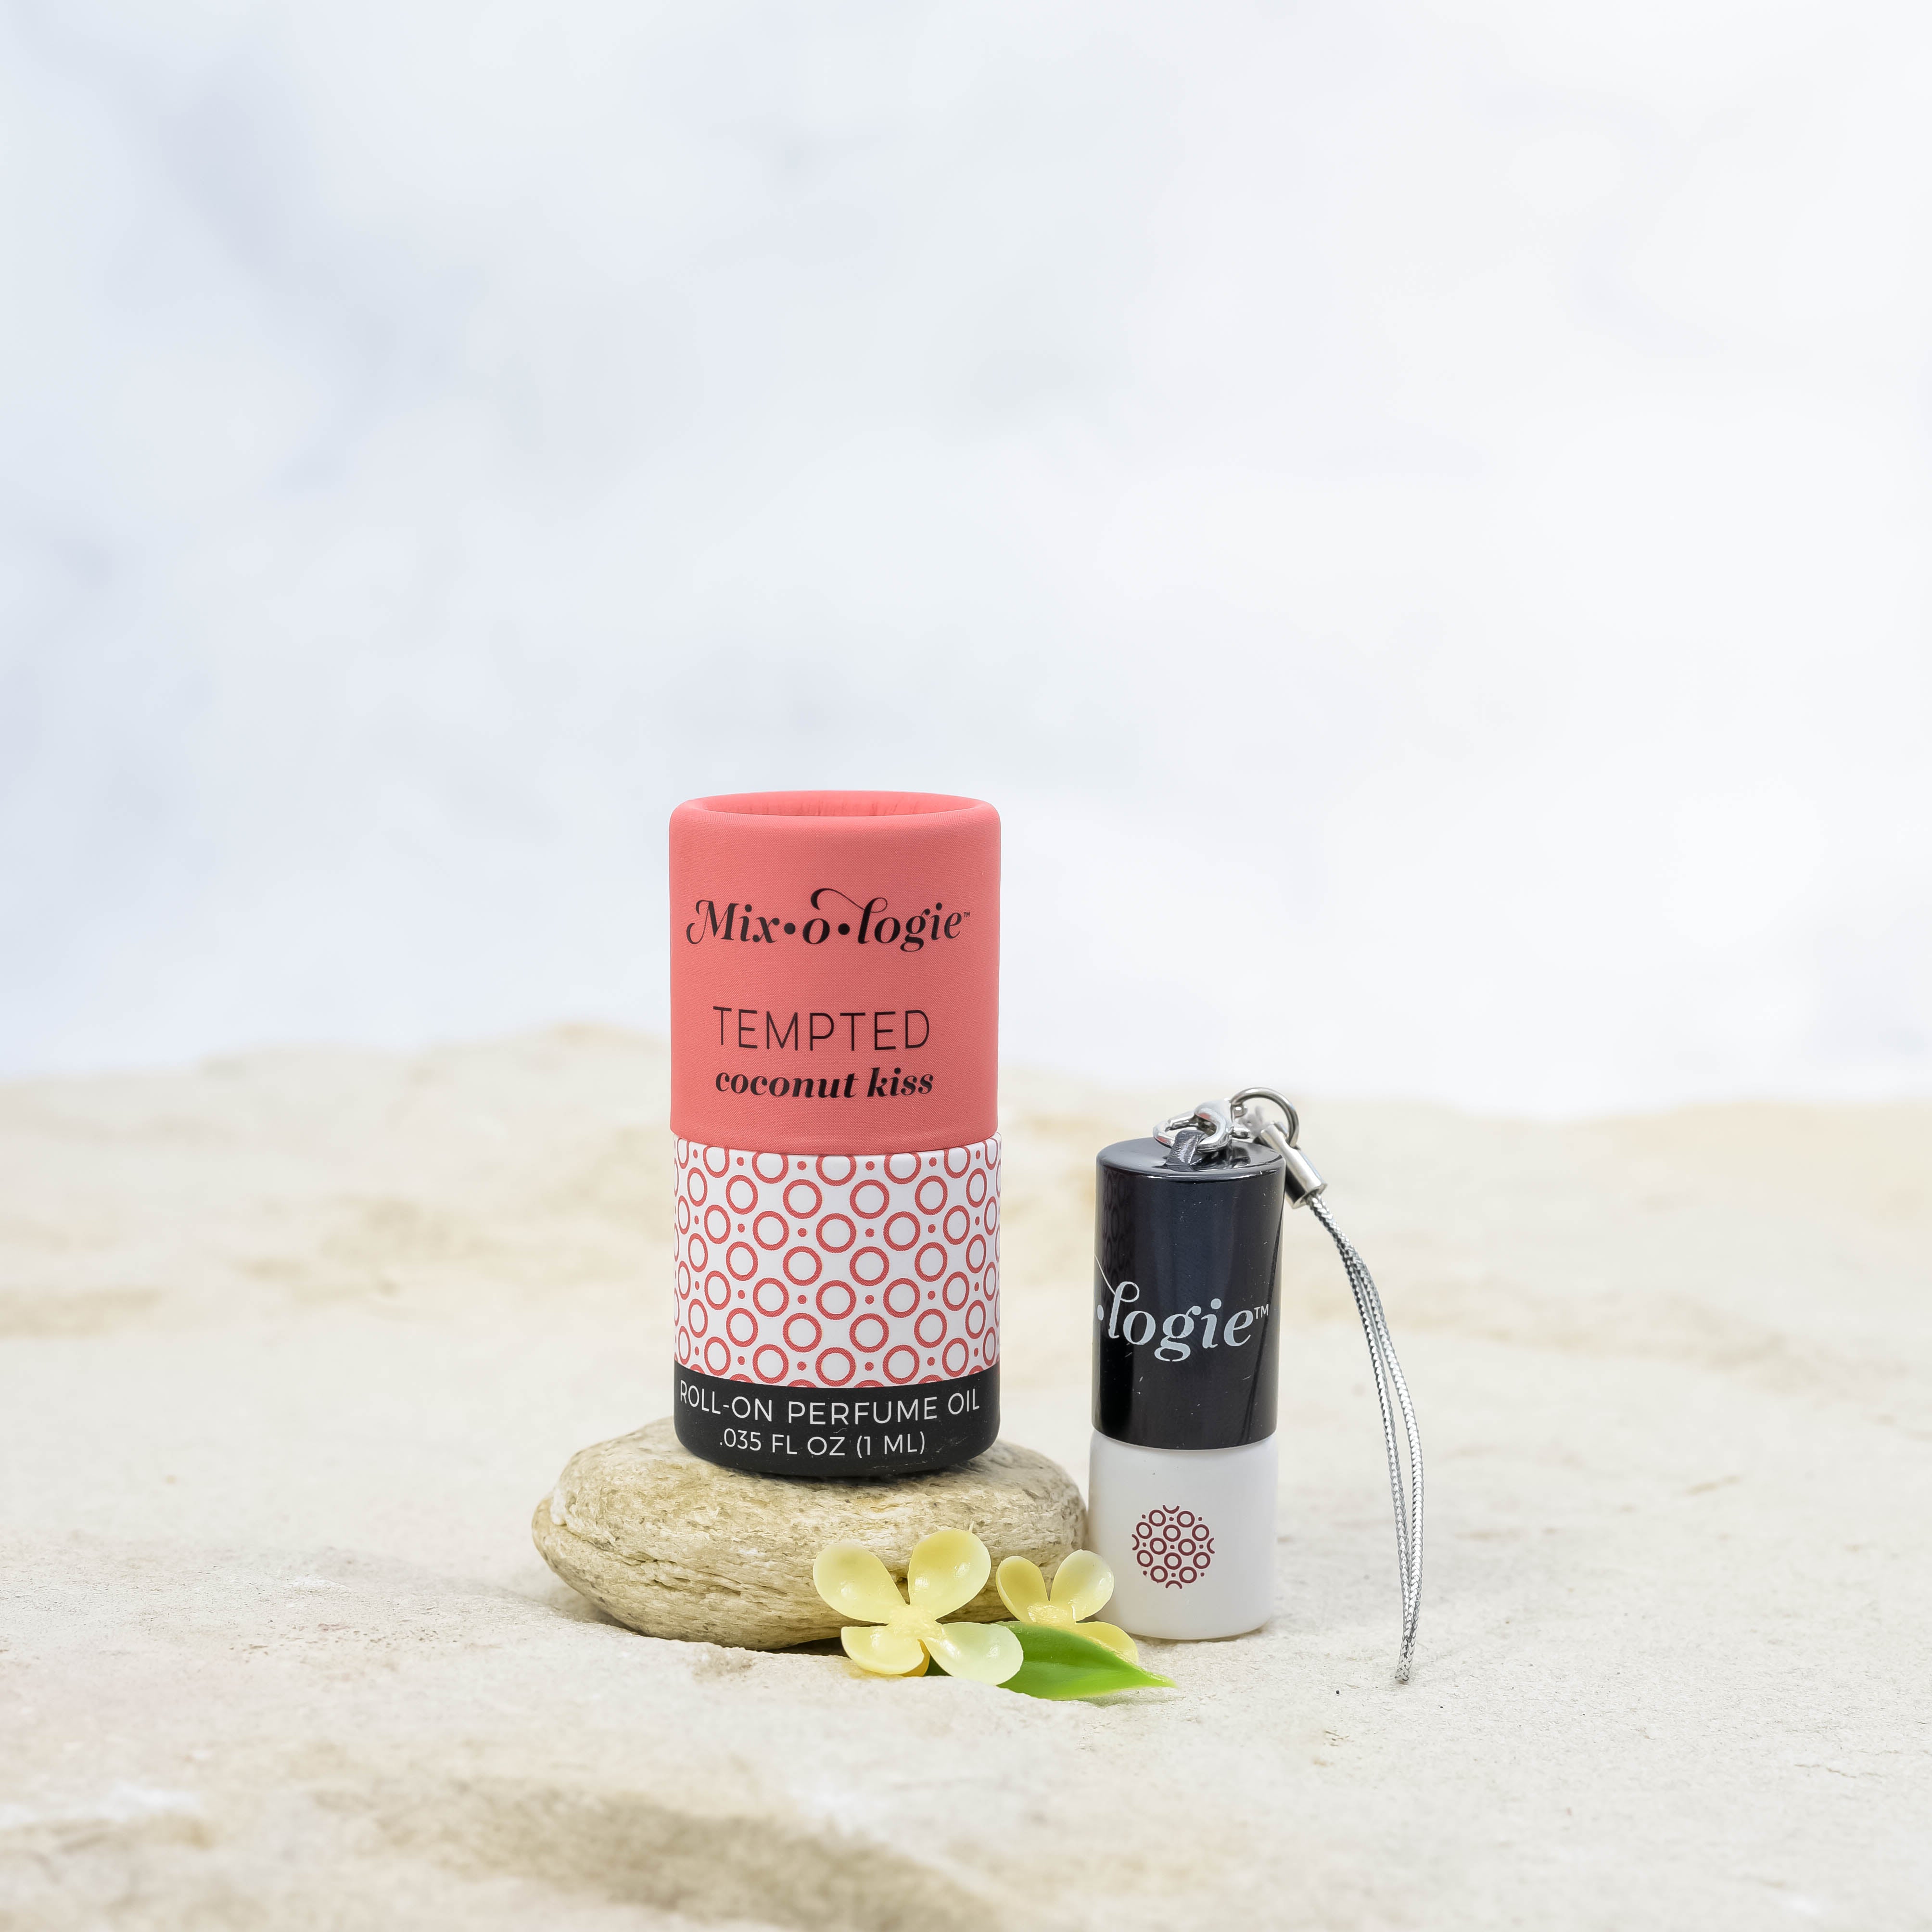 Mixologie's Tempted (coconut kiss) scented mini rollerball in 1 mL bottle with keychain lid. Displayed with cylinder packaging on sand.